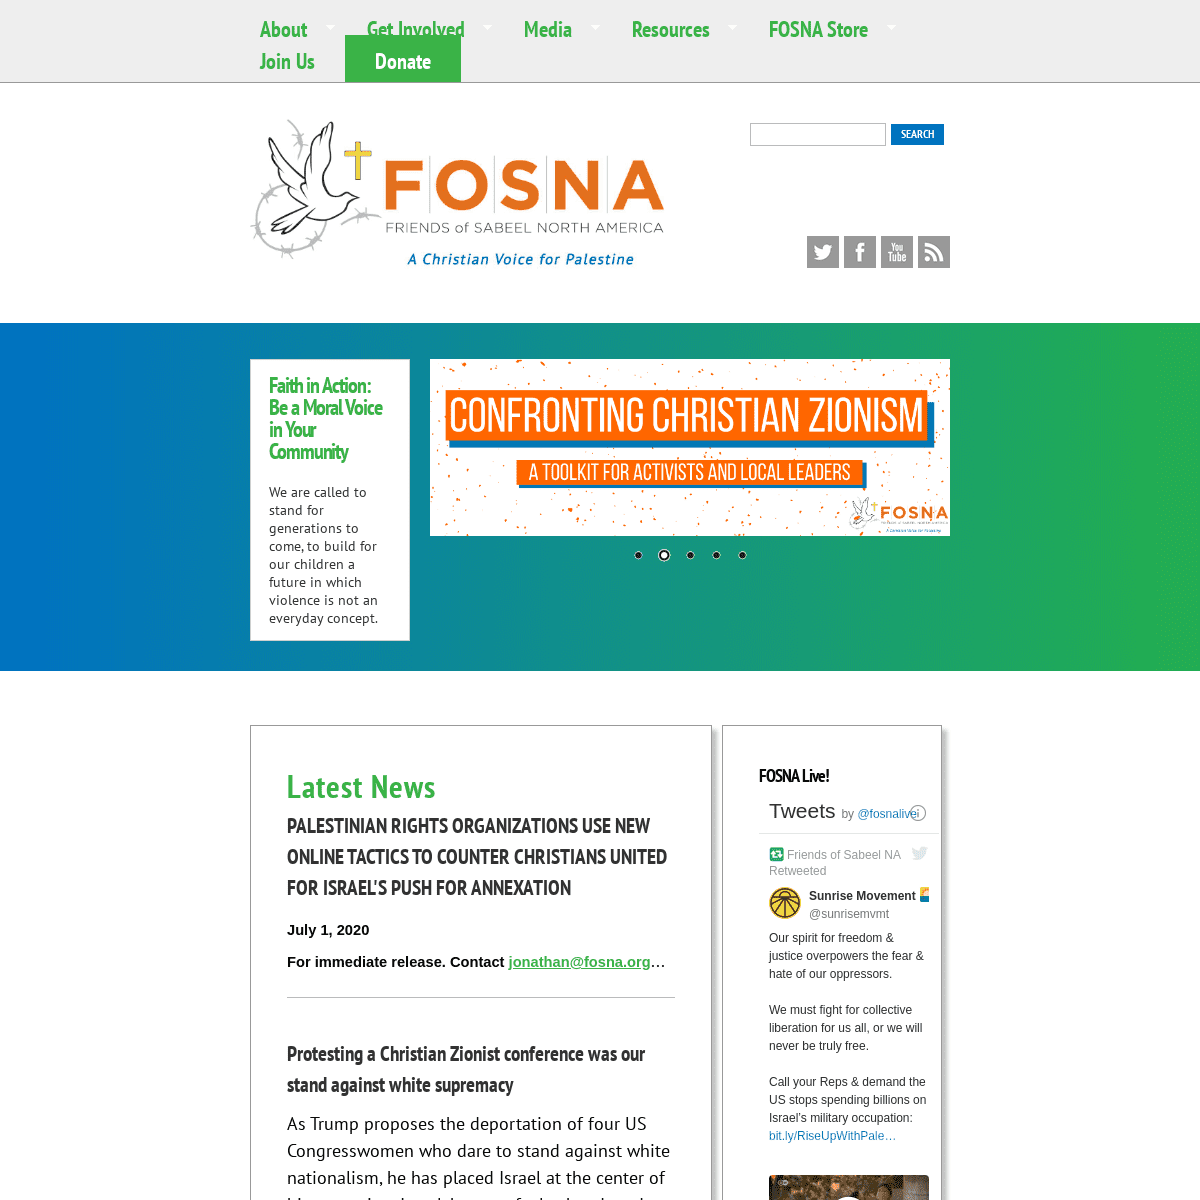 A complete backup of https://fosna.org